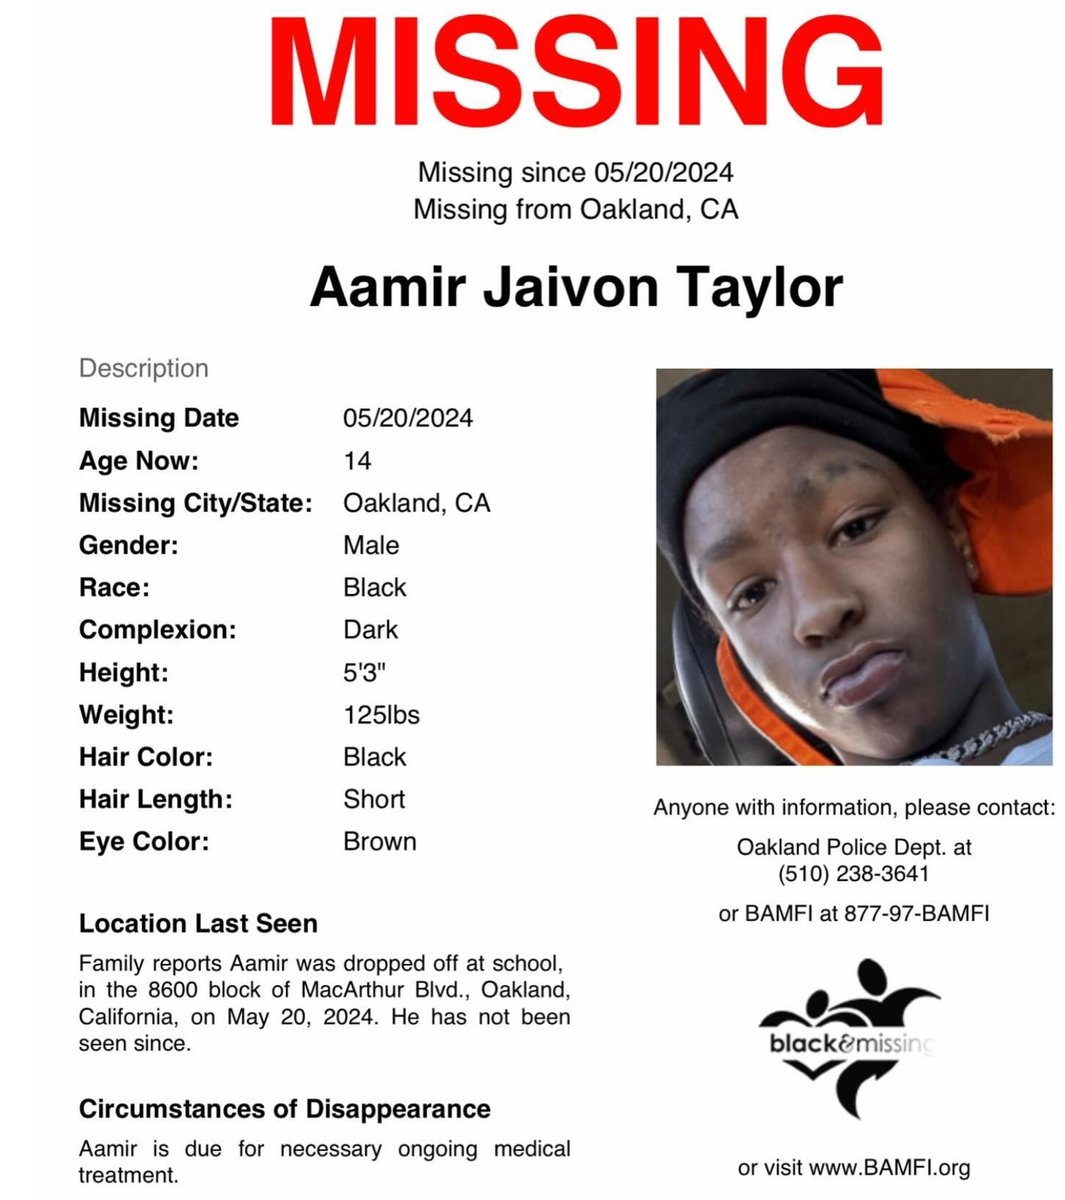 #AamirJaivonTaylor is #Missing since 5/20/24 from #Oakland #California. He is 14, has dark complexion, is 5'3, 125lbs, has Short Black Hair and Brown Eyes. If any info, please contact: Oakland PD 510-238-3641 Or 1-800-97-BAMFI #MissingJuvenile #MissingChild #HELPFIND